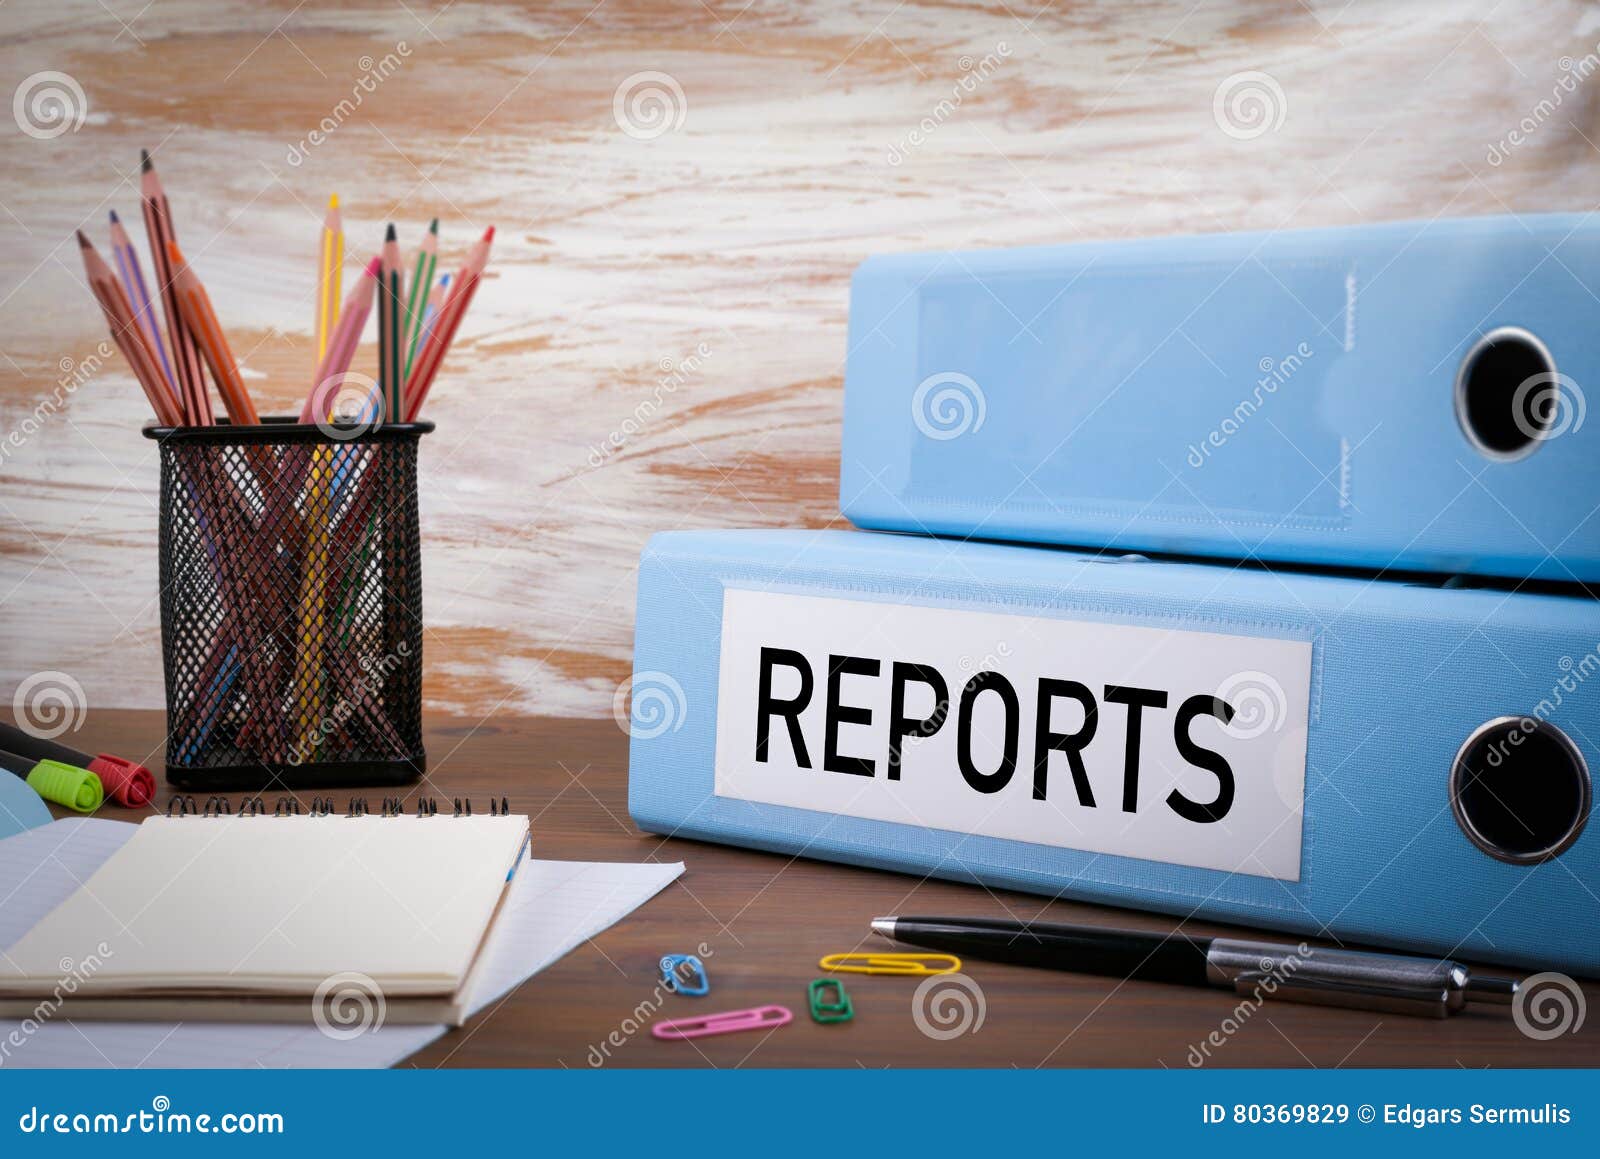 reports, office binder on wooden desk. on the table colored pencils, pen, notebook paper